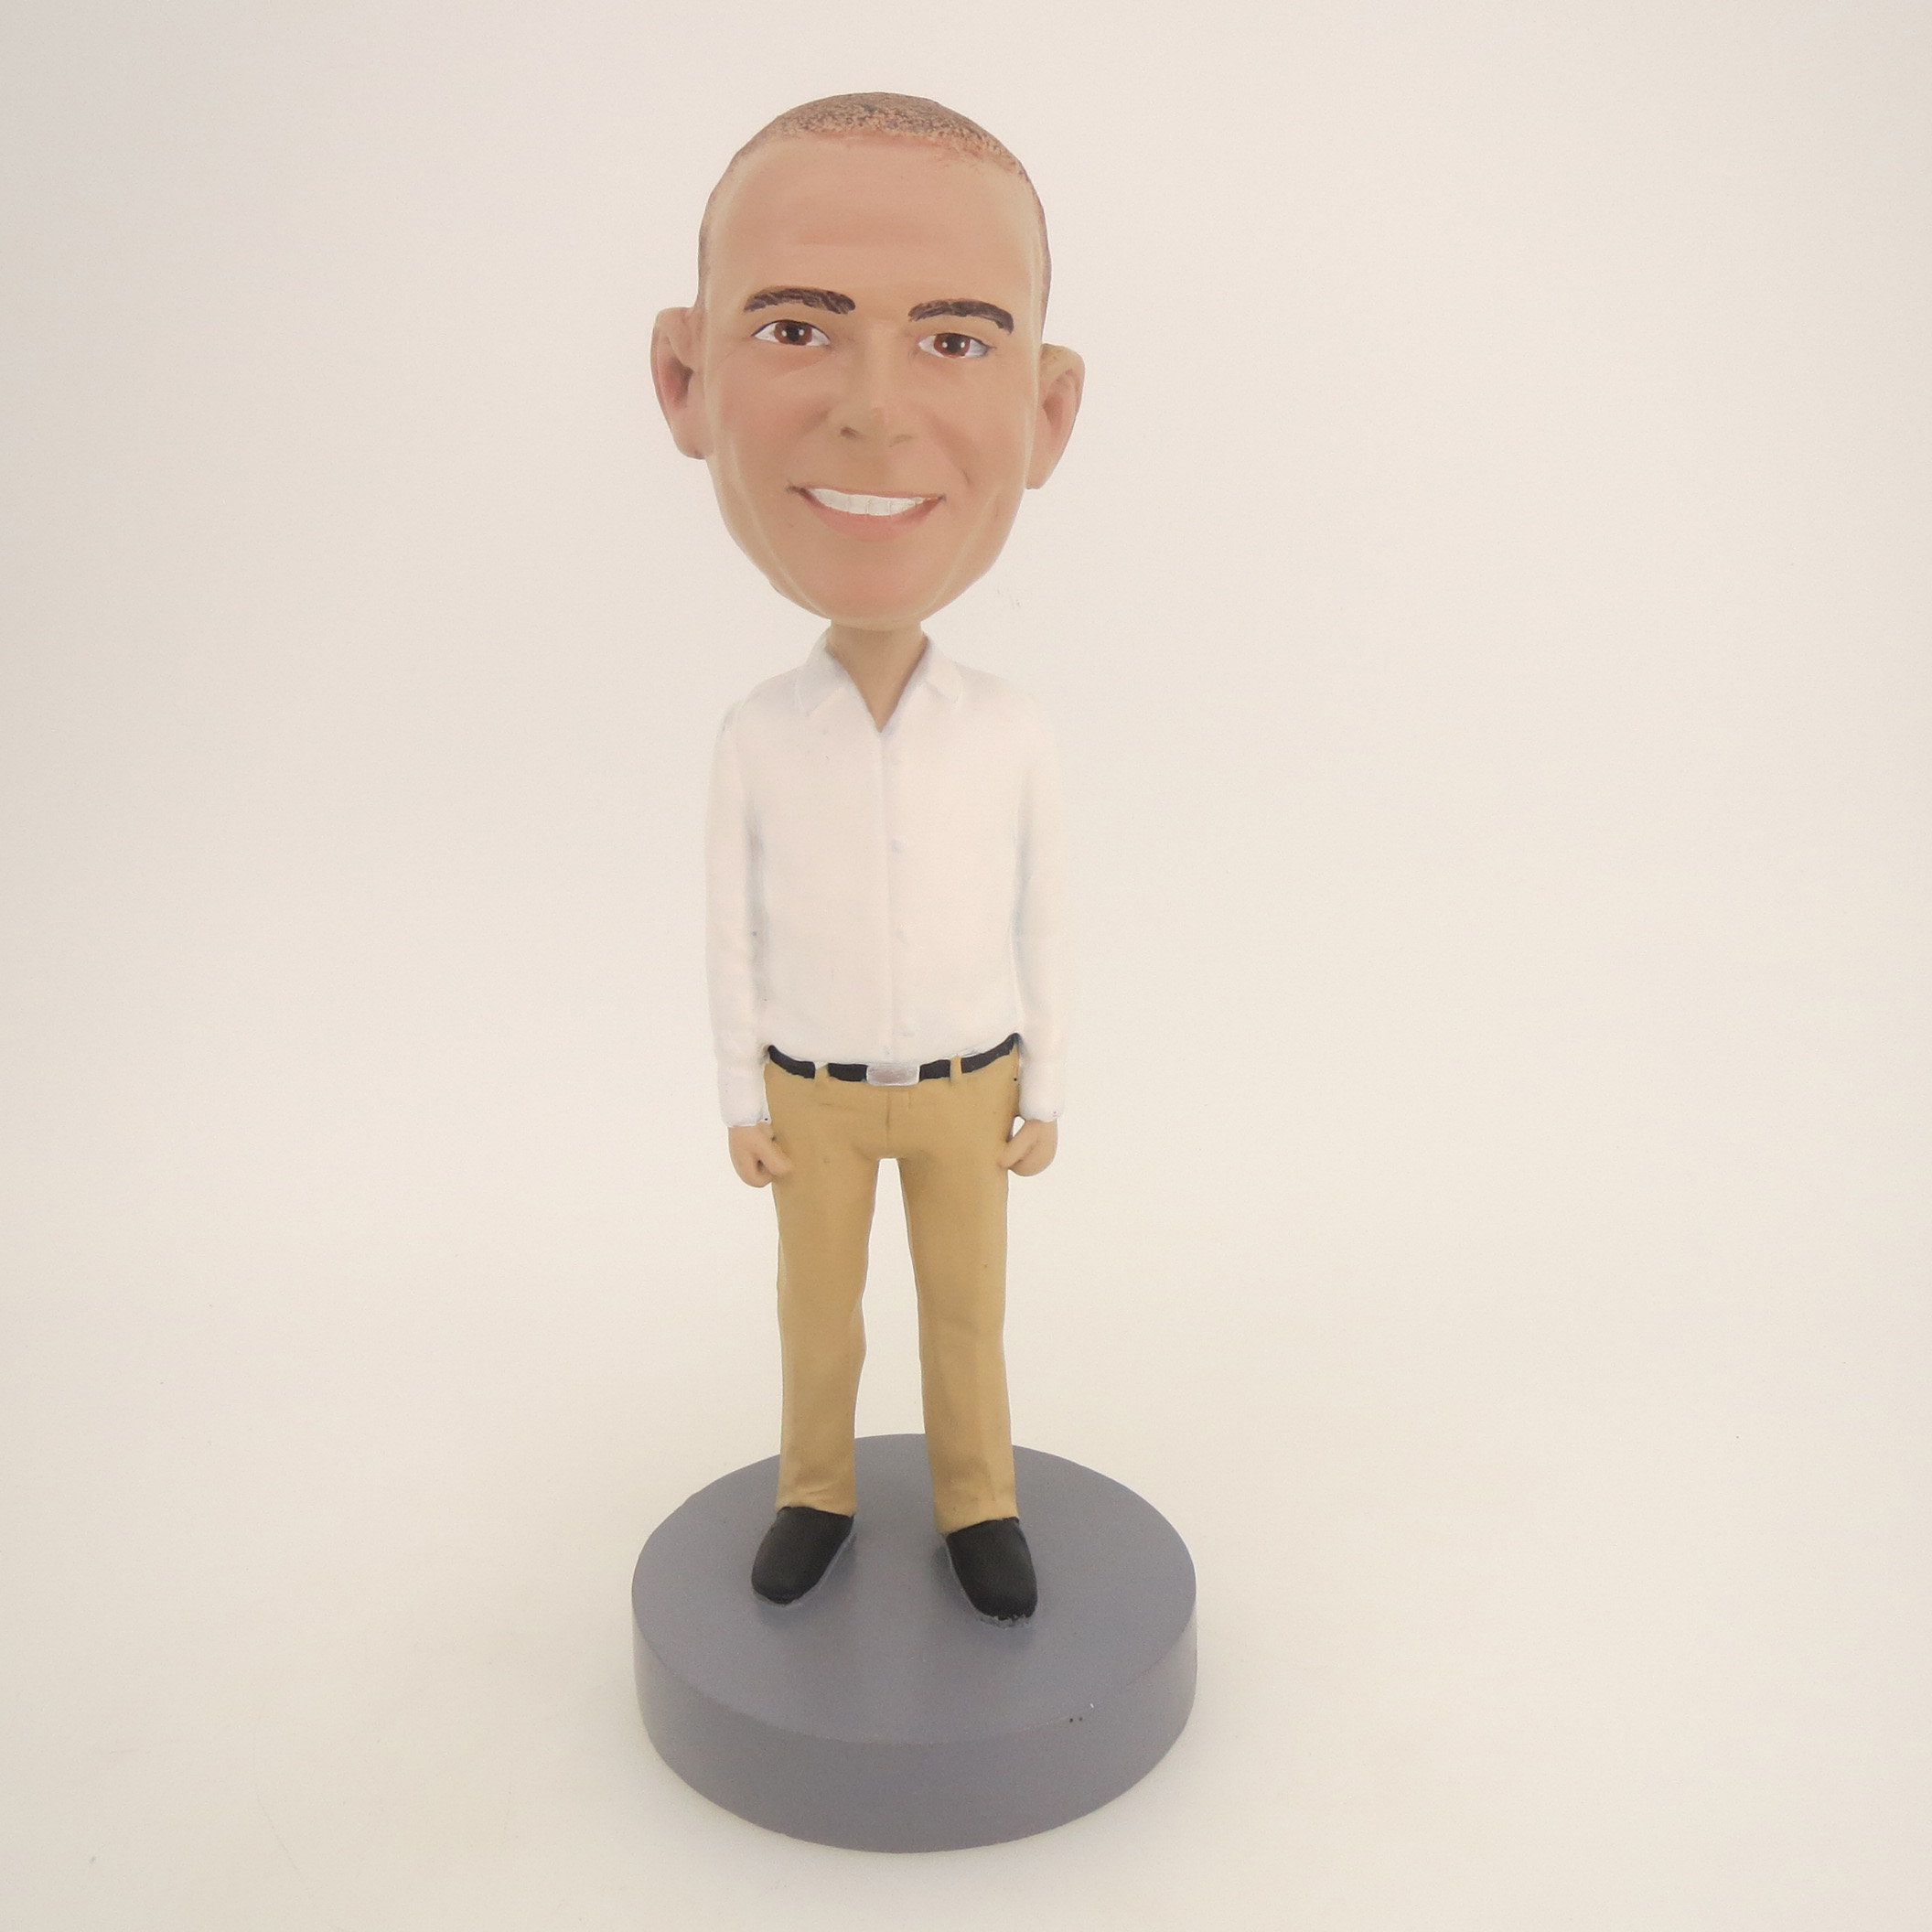 Picture of Custom Bobblehead Doll: Casual Man In White Shirt